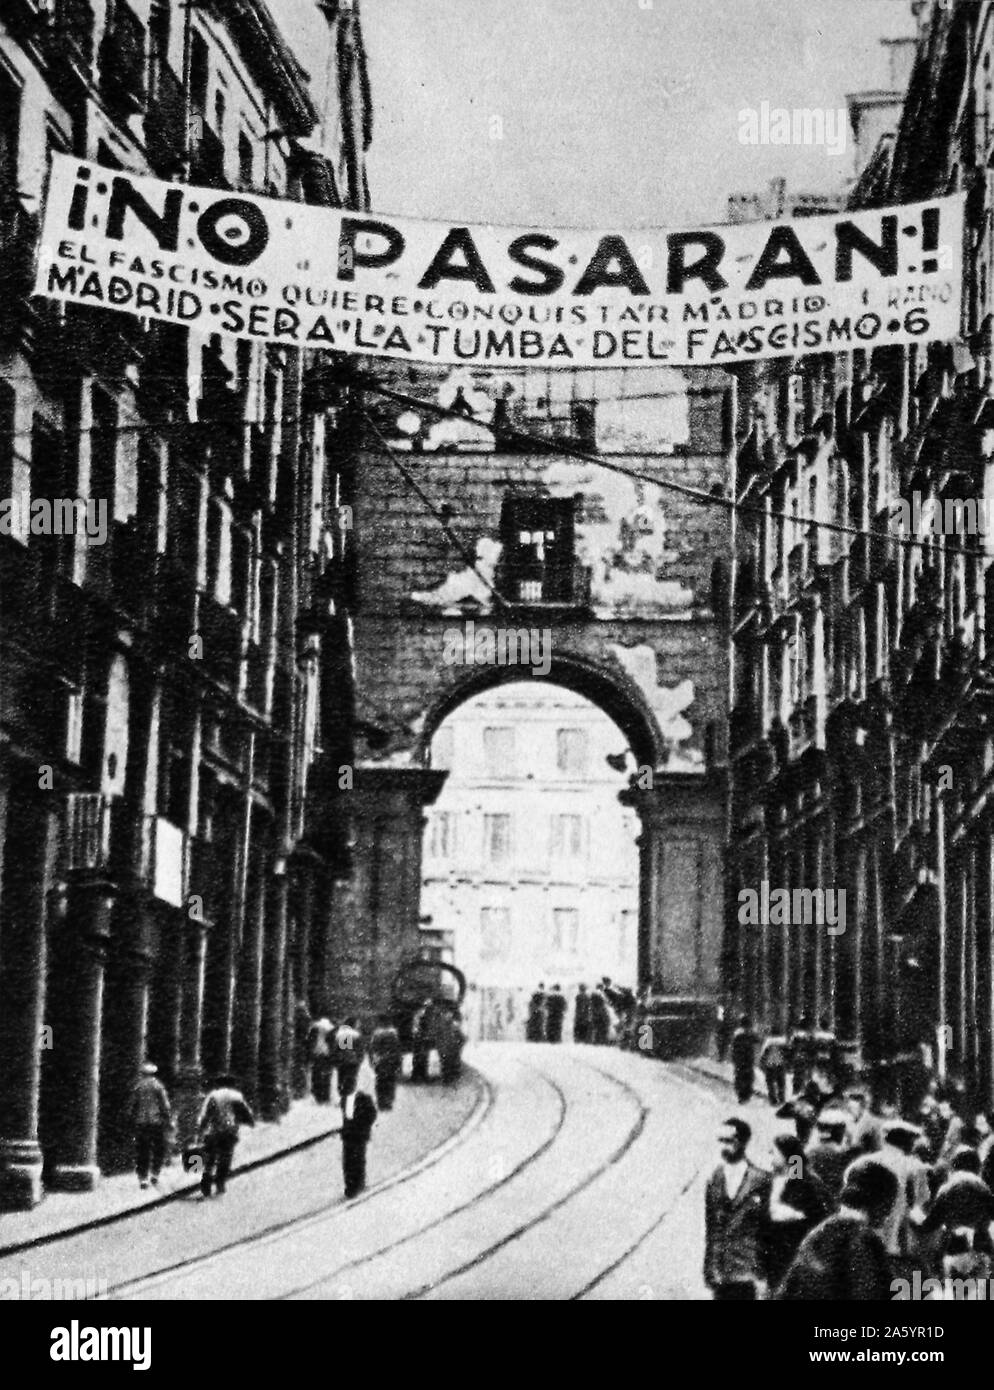 Spanish Civil War: republican banner above a Madrid street reads ' No Passaran! (They shall not pass). Below is stated: Madrid sera la tumba del fascismo (Madrid will be the tomb of fascism). 1937 Stock Photo